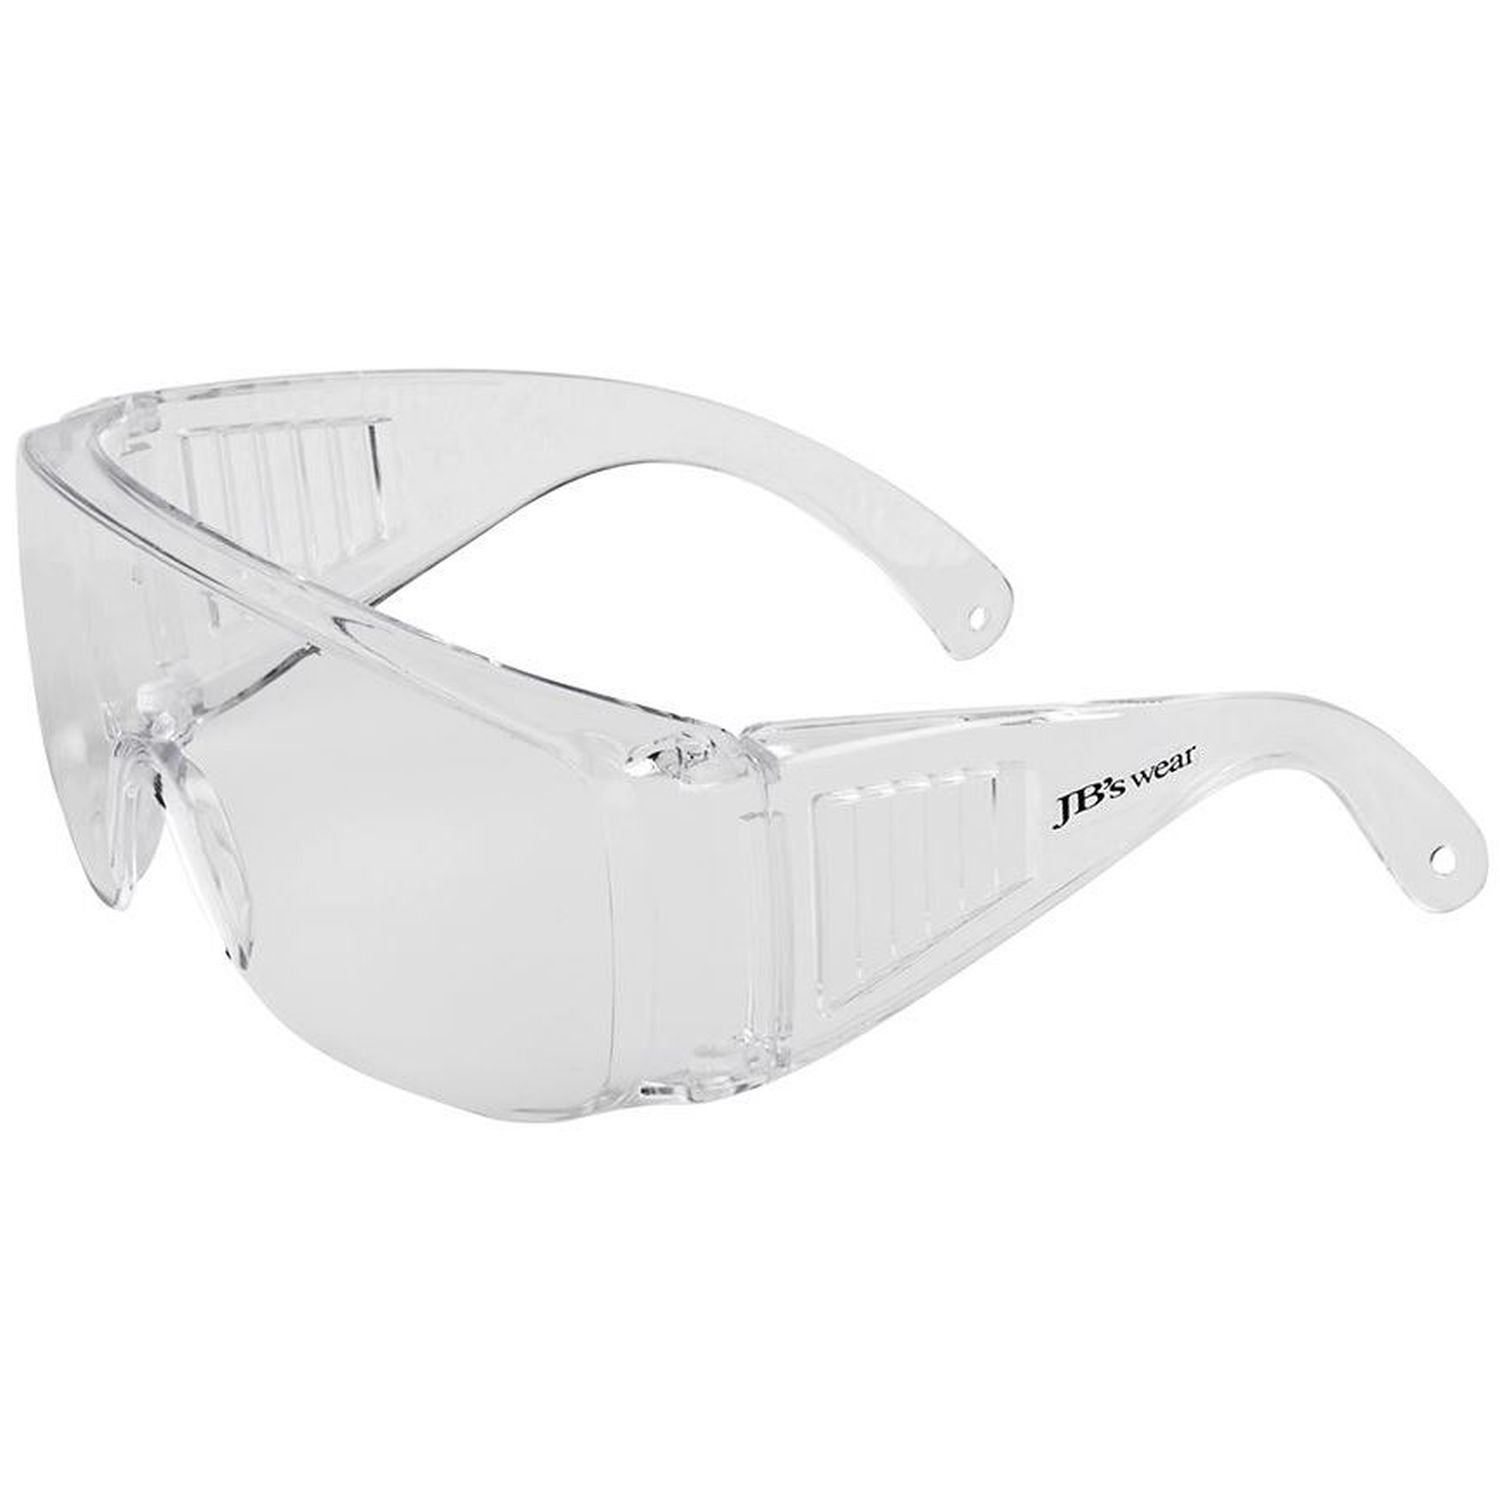 Visitor Anti Scratch Clear Safety/Overglasses